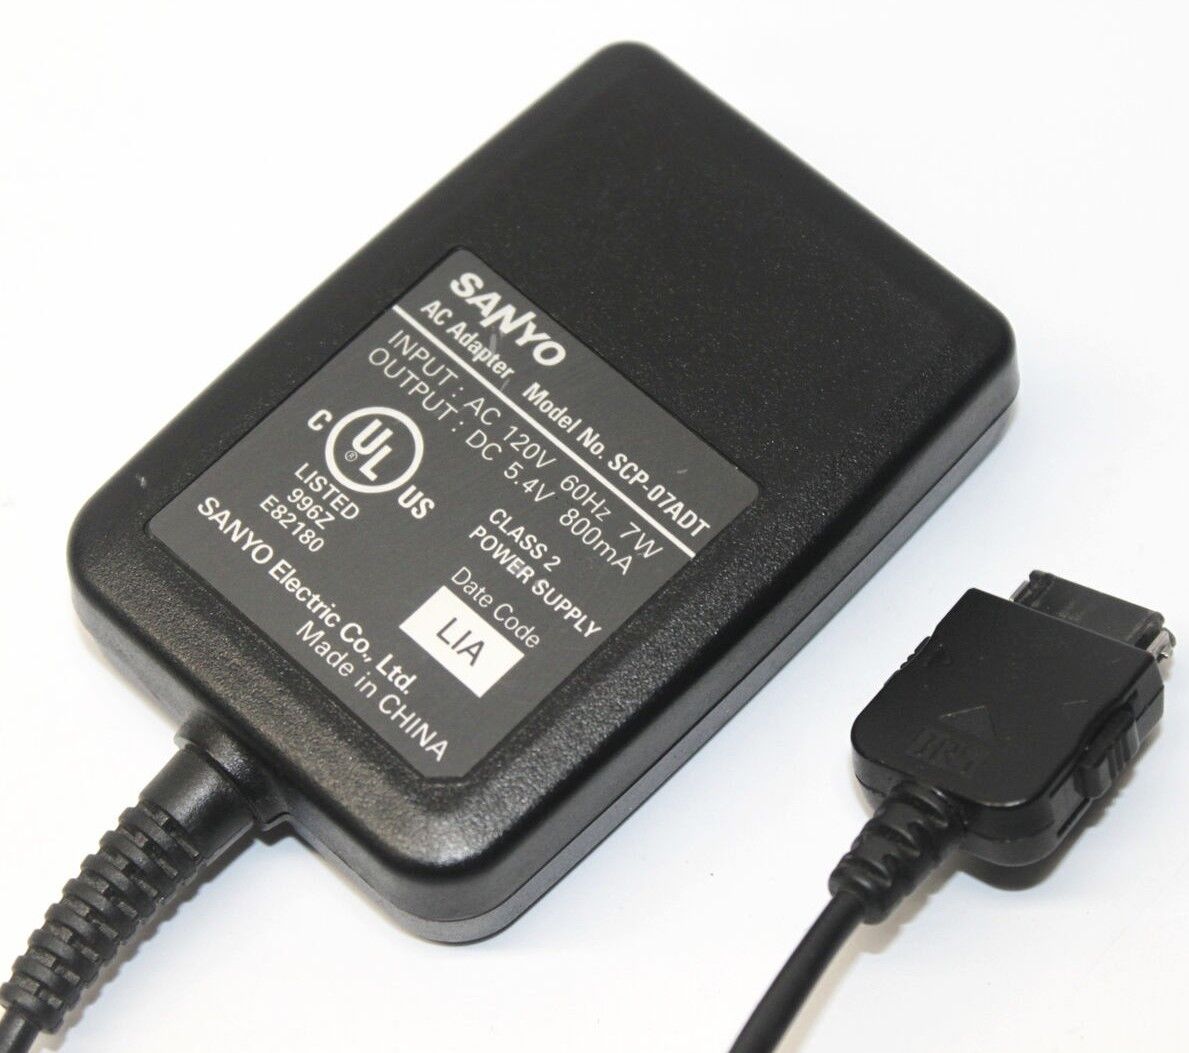 Sanyo SCP-07ADT Class 2 Power Supply AC Adapter Output DC 5.4V 800mA Brand: Sanyo Type: Adapter MPN: SCP-07ADT